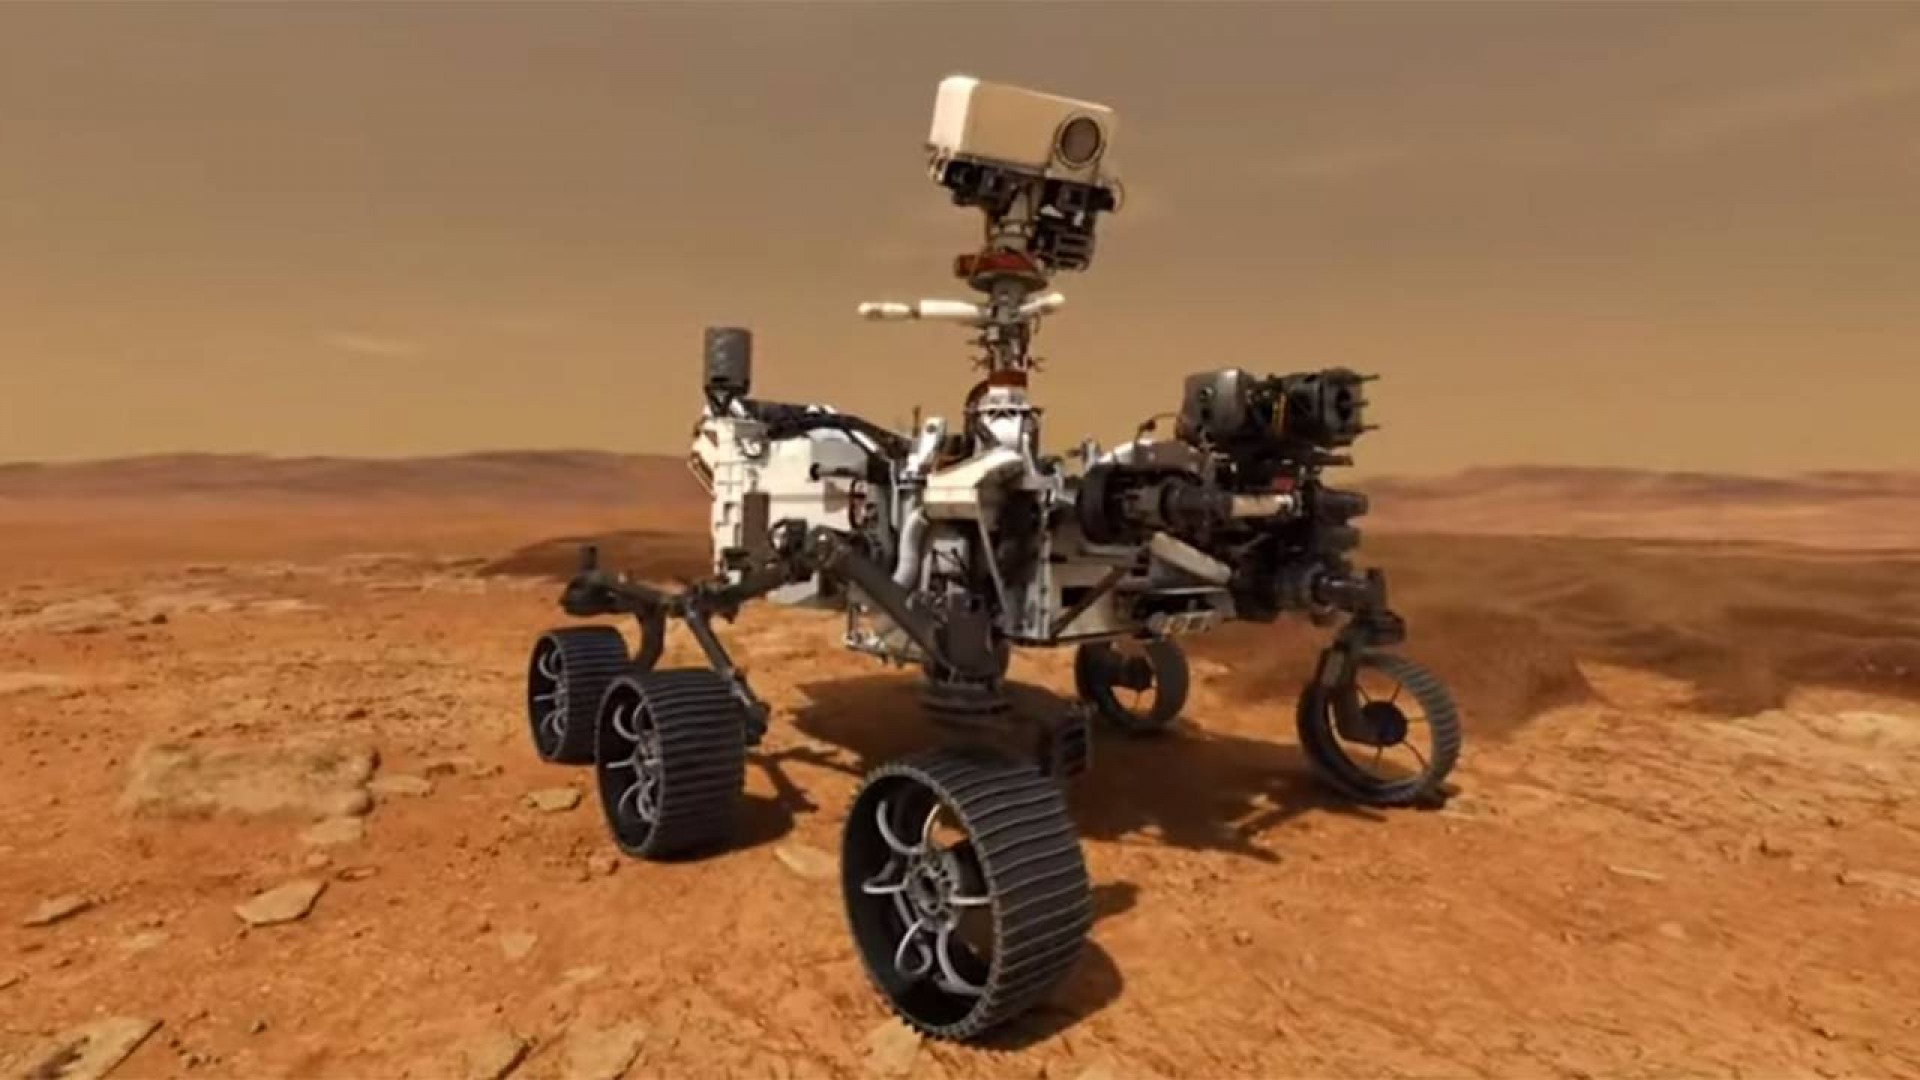 NASA's Current Mars Perseverance the Mars 2020 Rover - September 14, 2020 - Unleash Council Bluffs